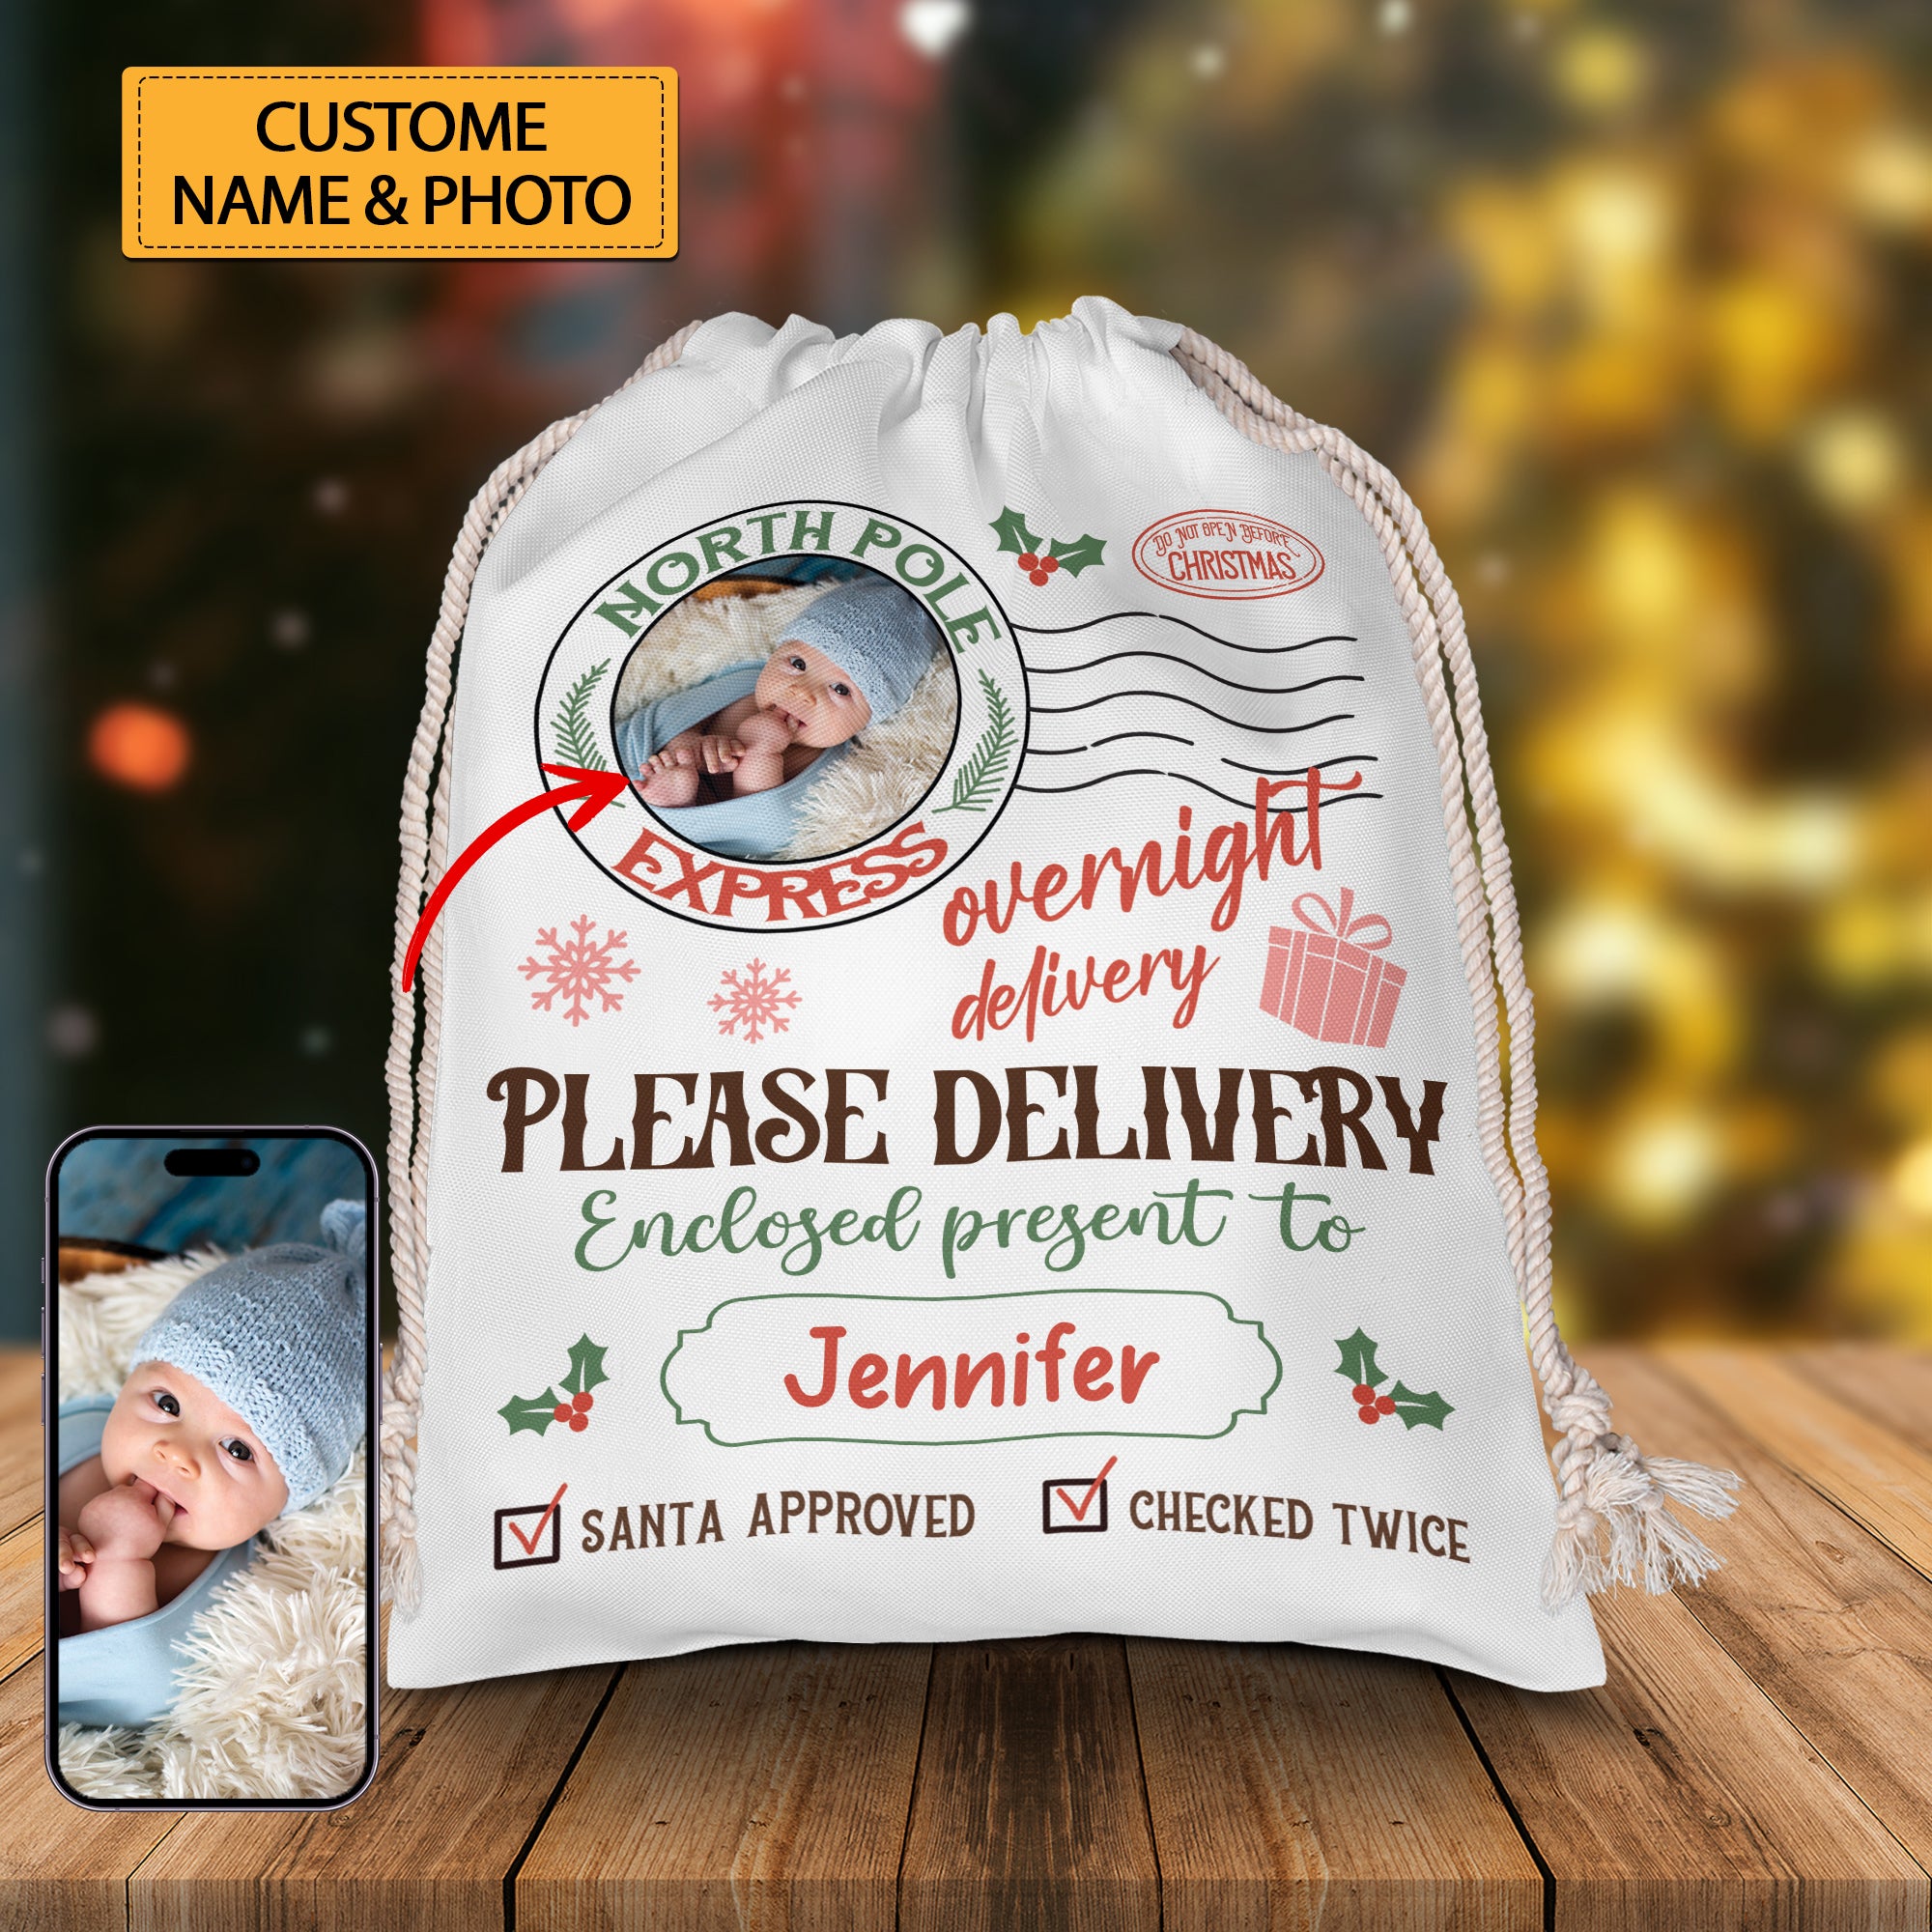 Overnight Deliver Special Gift - Custom Photo And Name, Personalized String Bag, Gift For Family, Christmas Gift